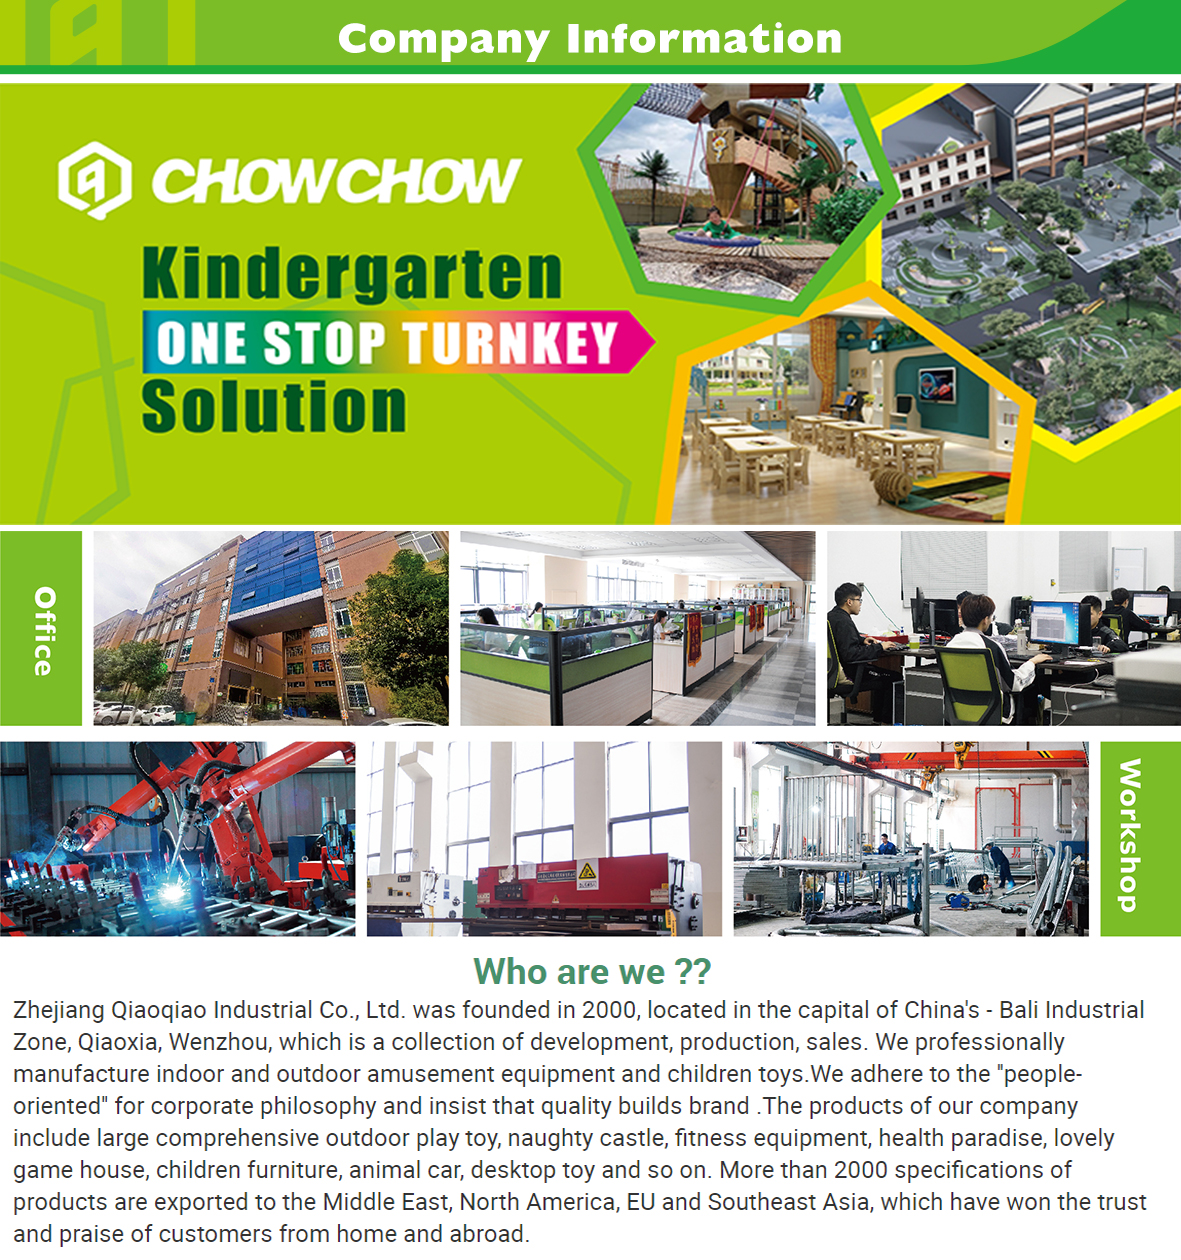 chowchow company introduction